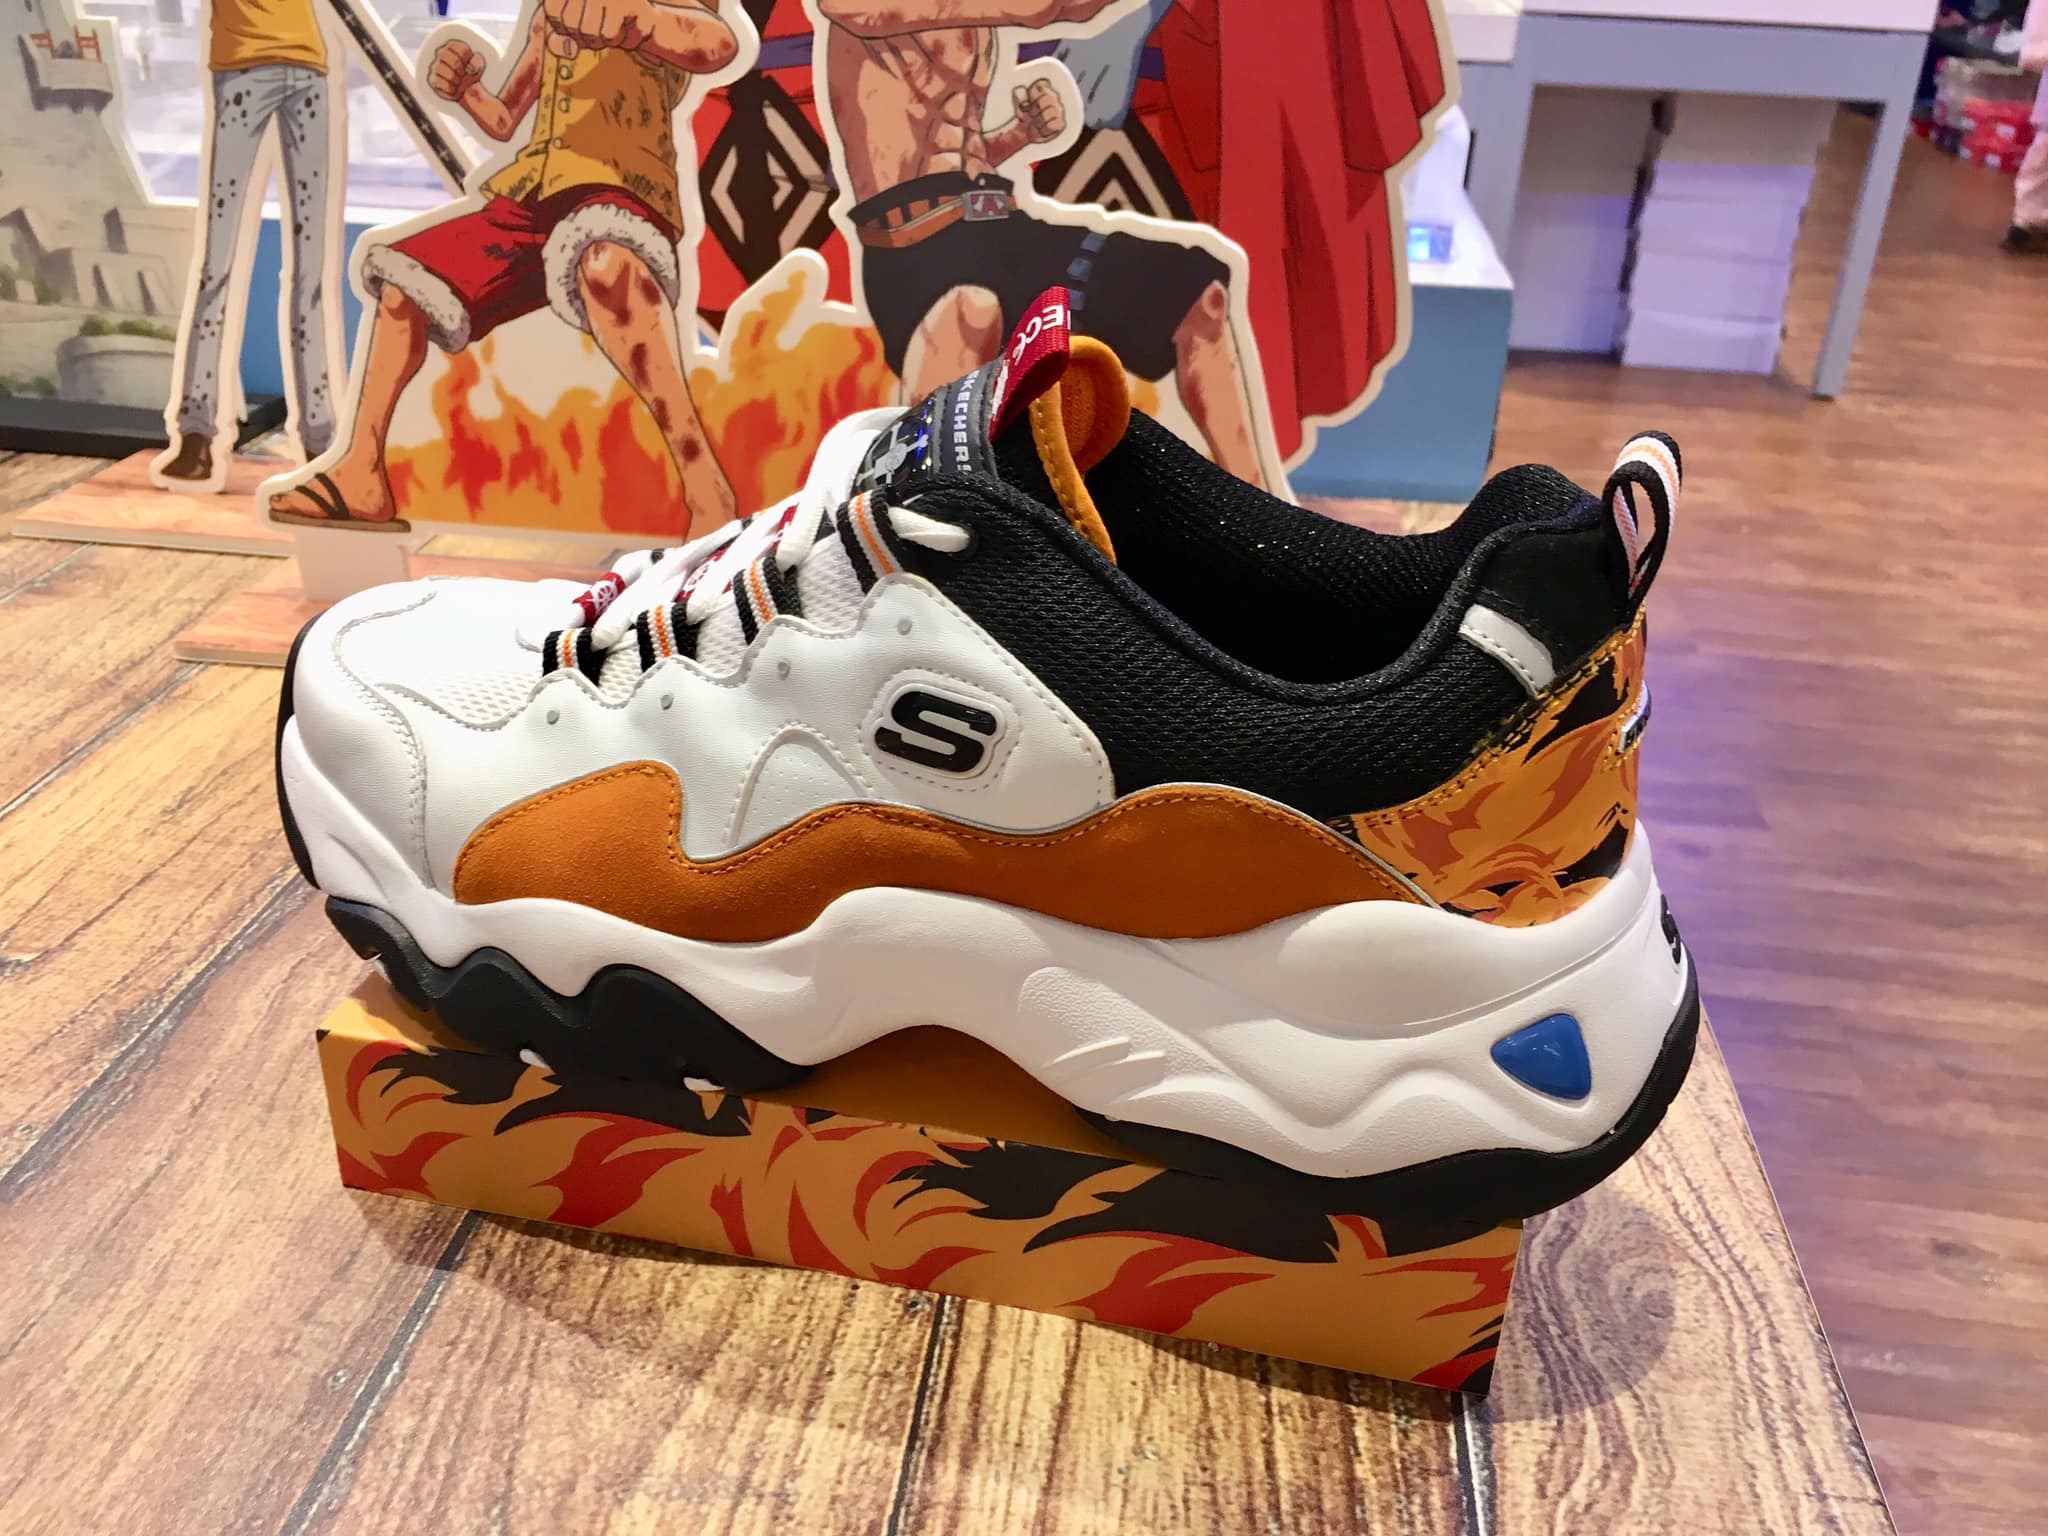 skechers one piece price in malaysia 